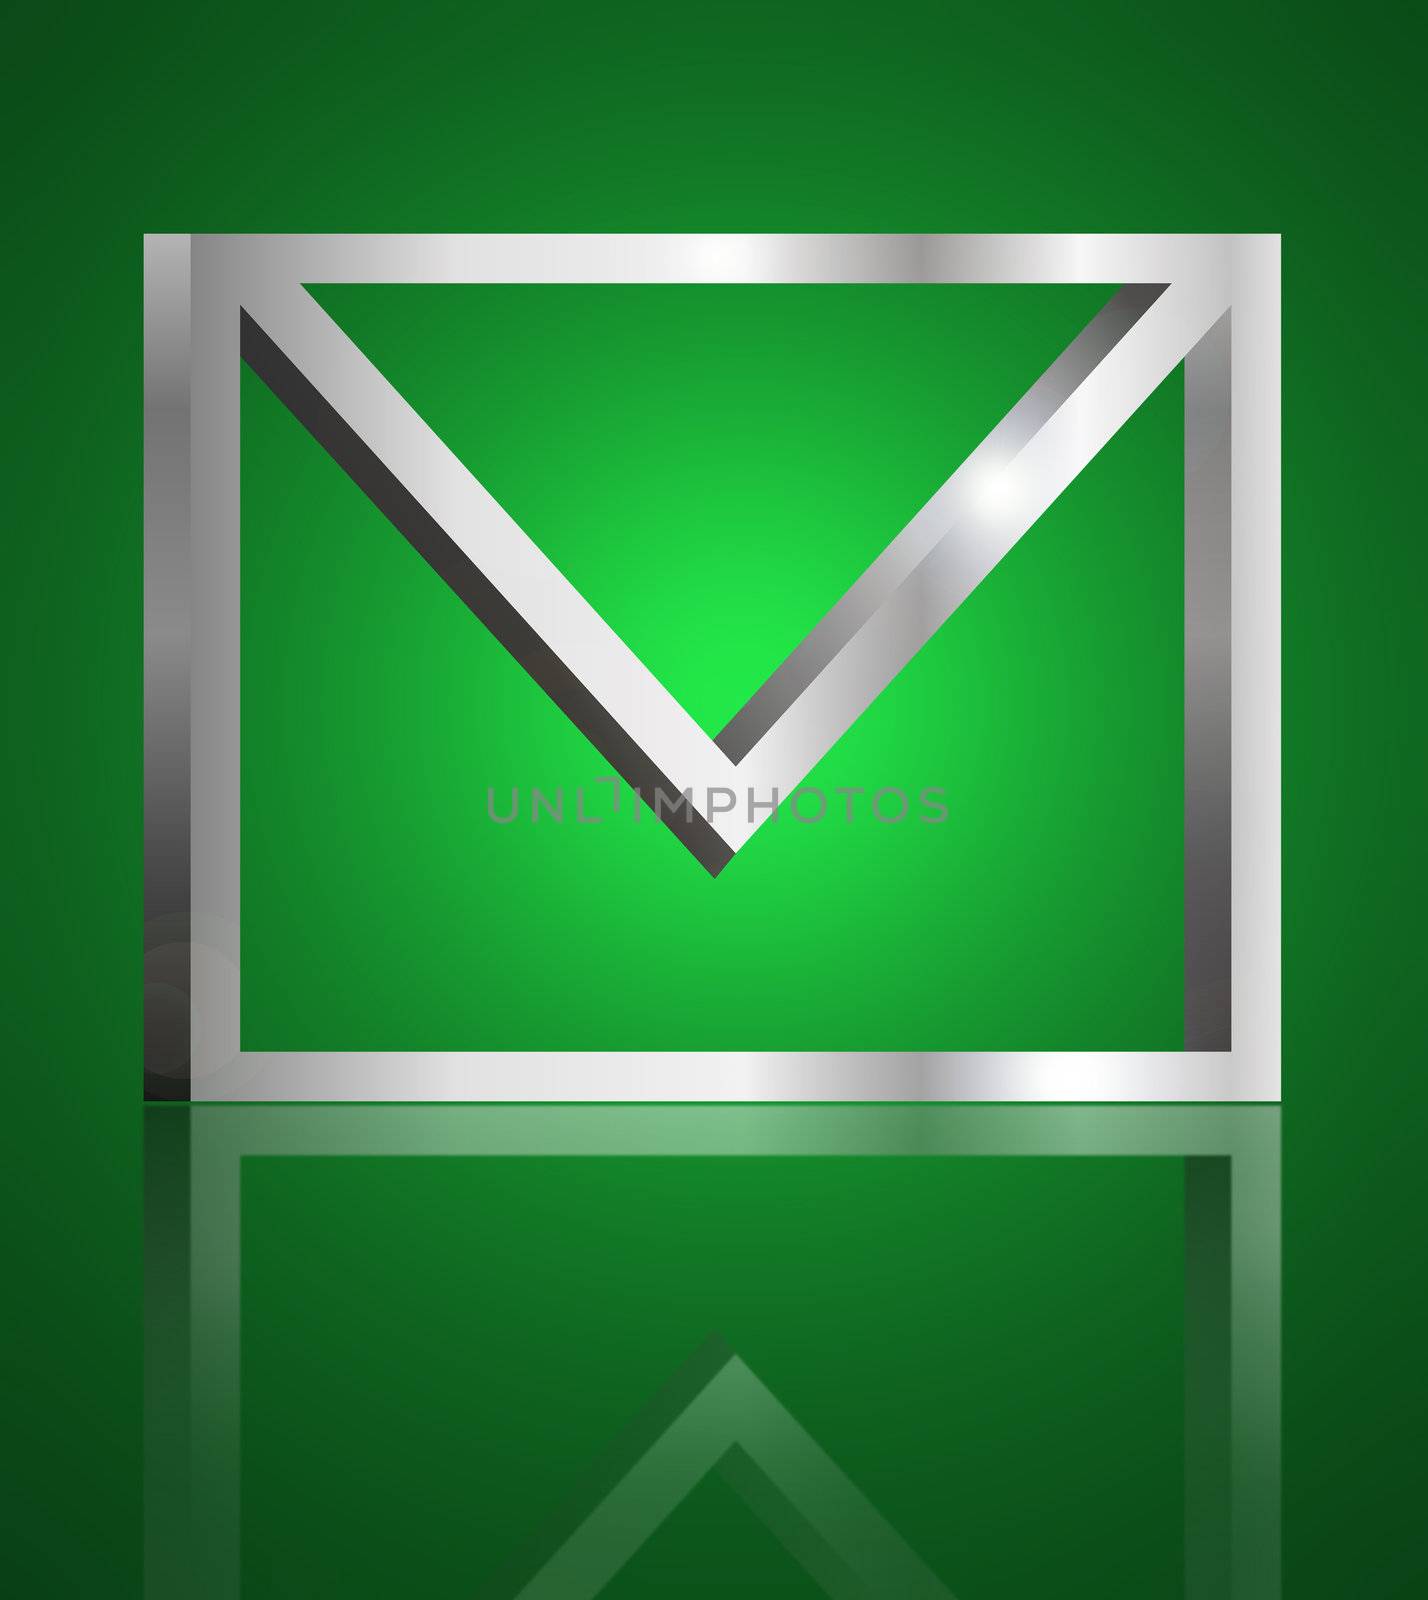 Illustration depicting a single metallic email symbol arranged over green and reflecting into foreground,.